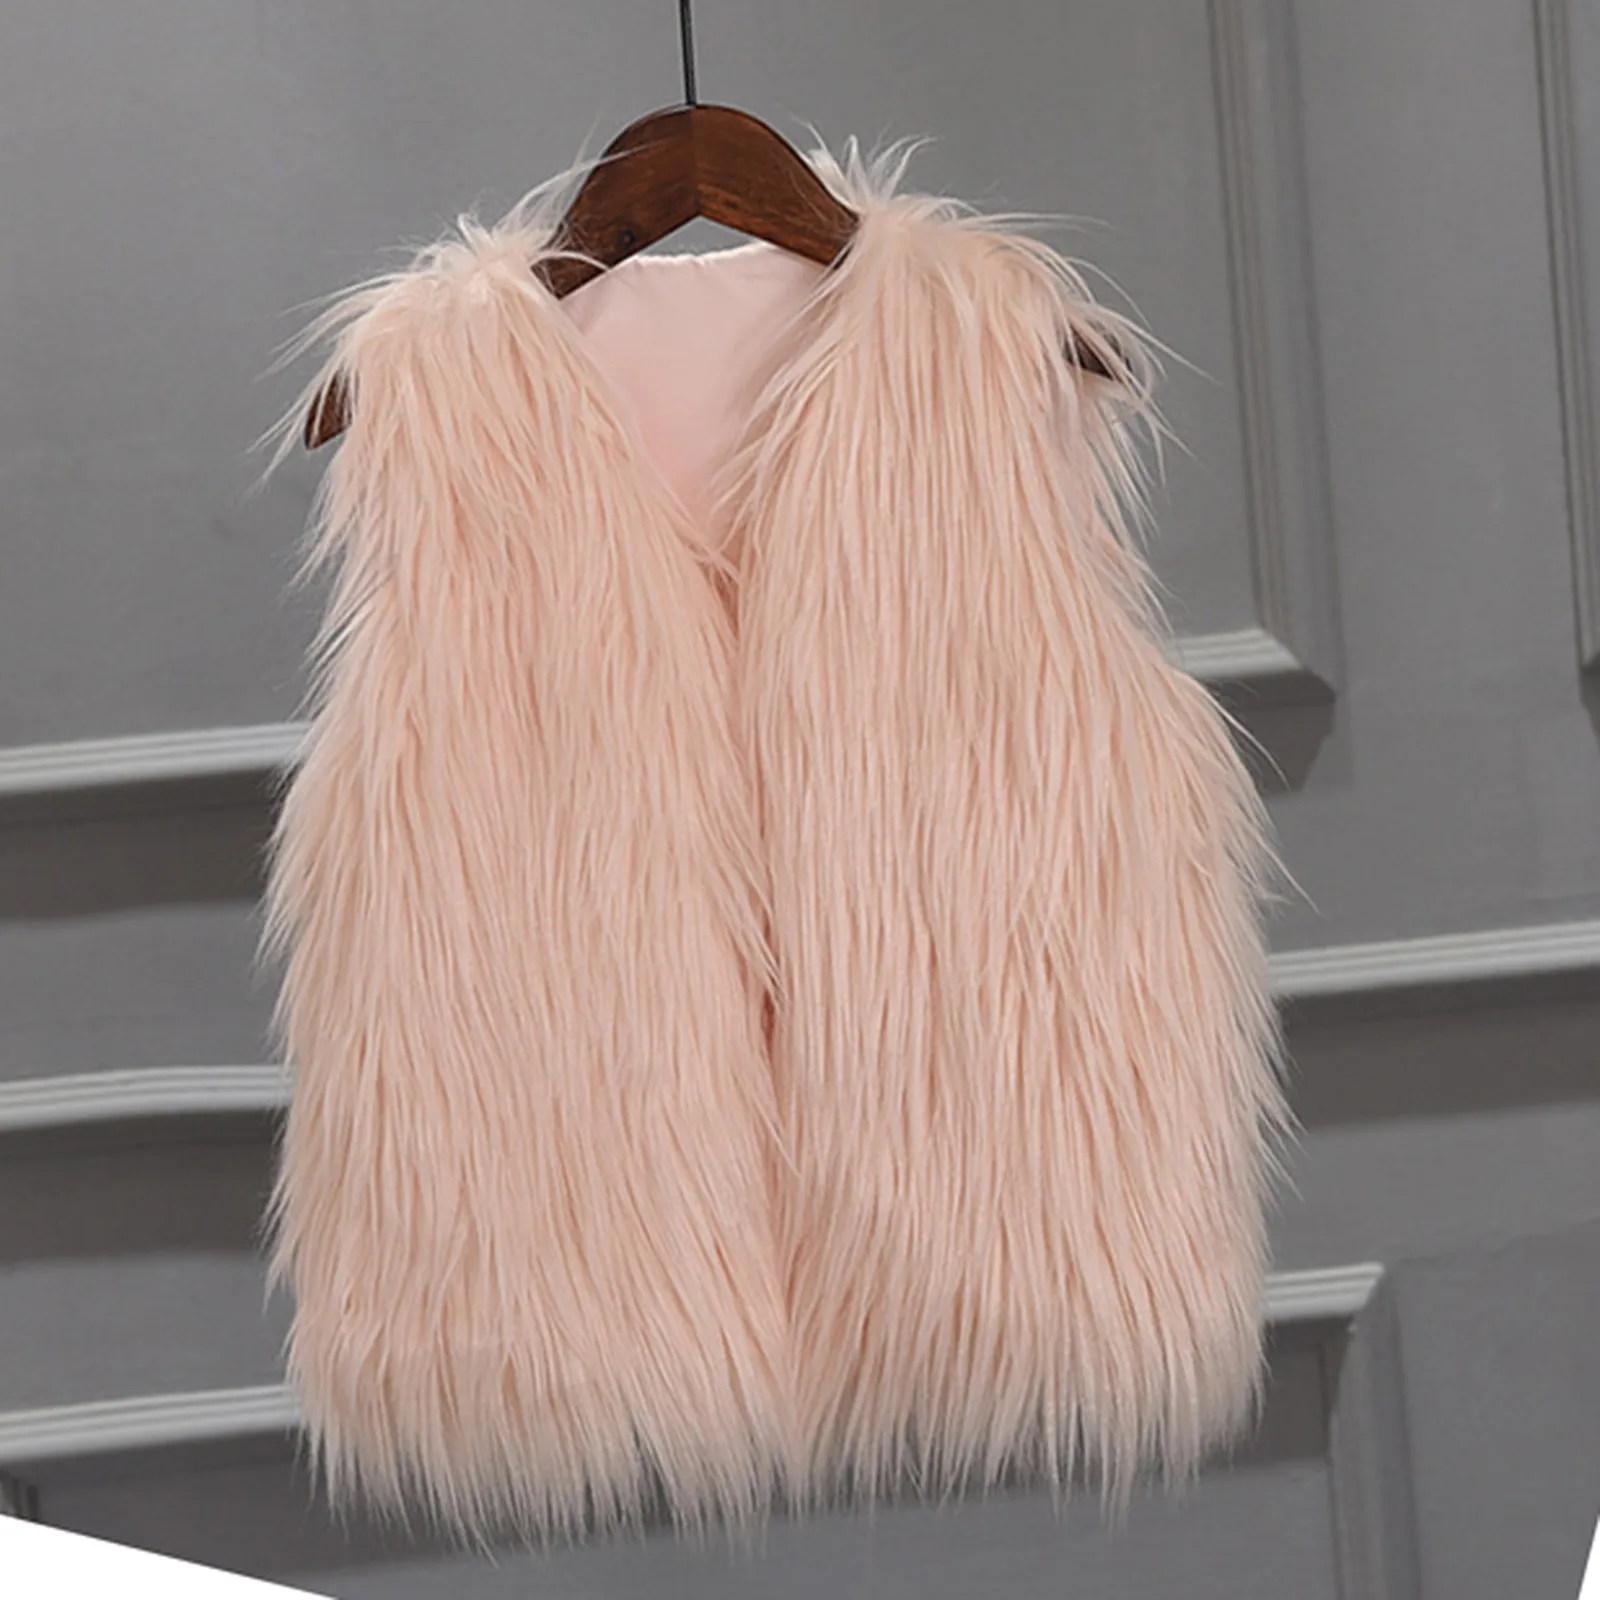 HOMEBABY Girl Faux Fur Gilets Kids Winter Warm Baby Clothes Girls Sleeveless Jacket Winter Waistcoat Vest Coat Fluffy Thick Coat Outwear For 4-10 Years 